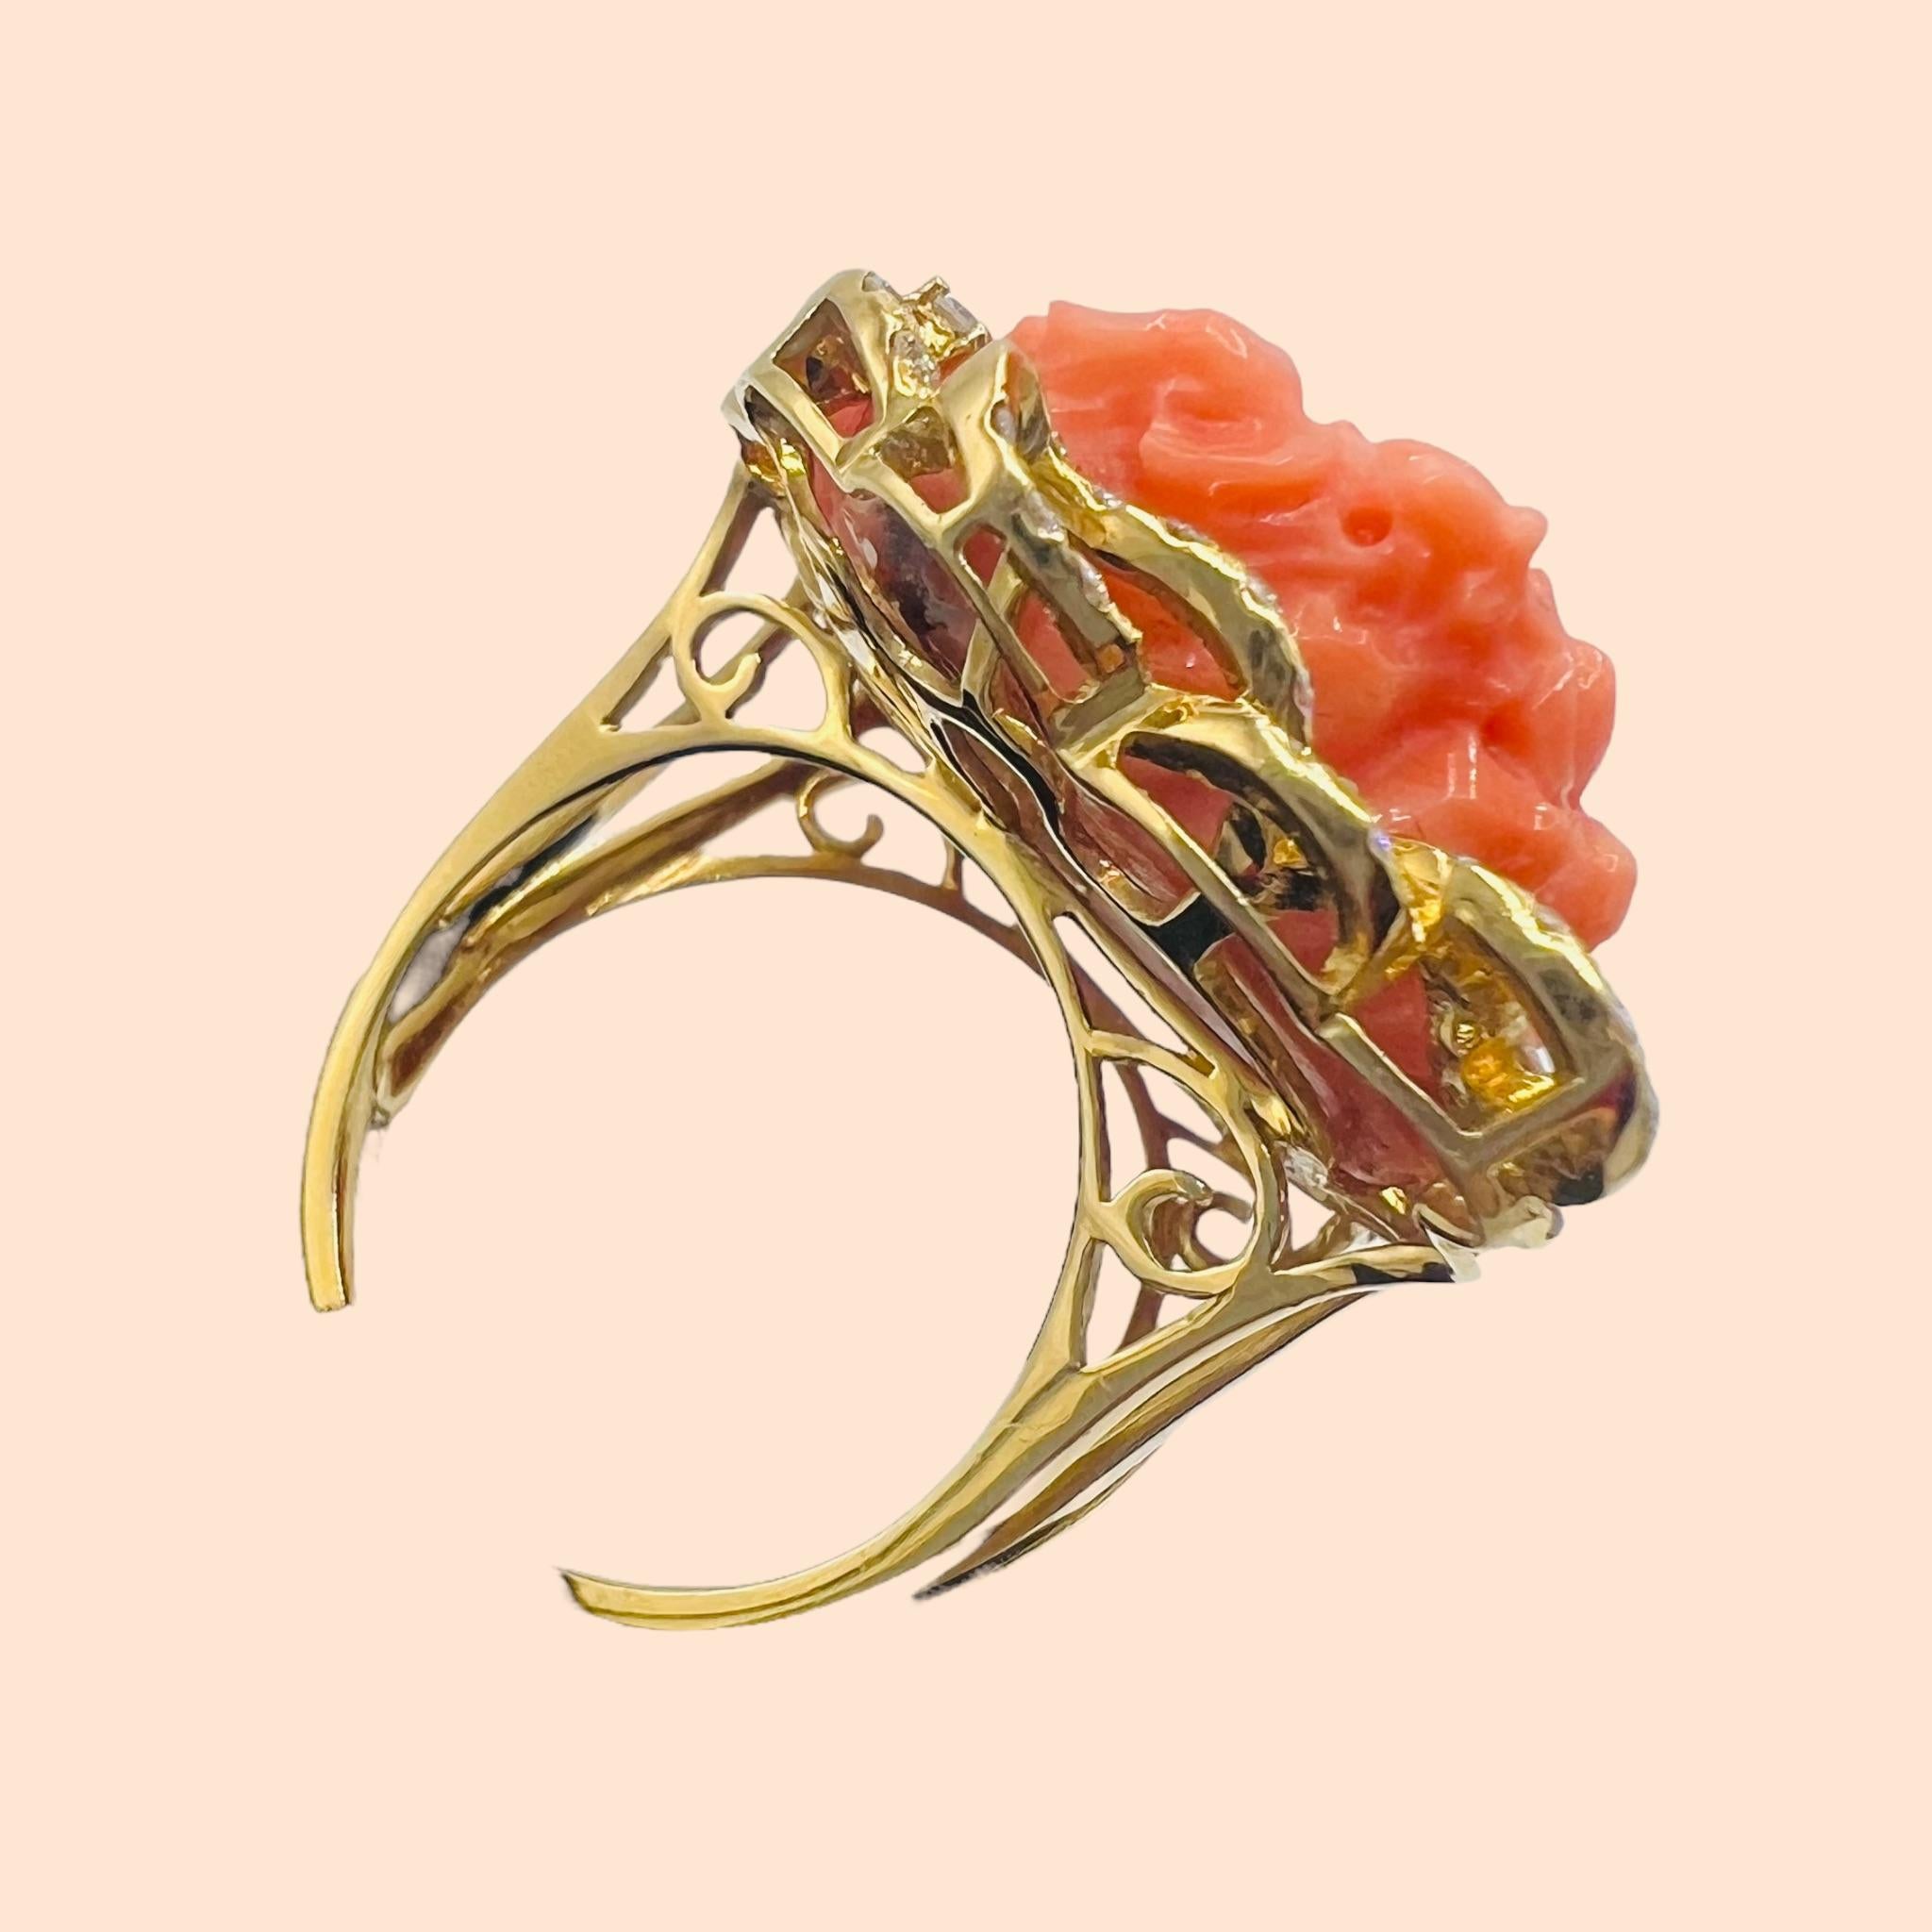 18 Carat Gold Cocktail Ring Set with a Superb Cameo in Coral with diamonds 11